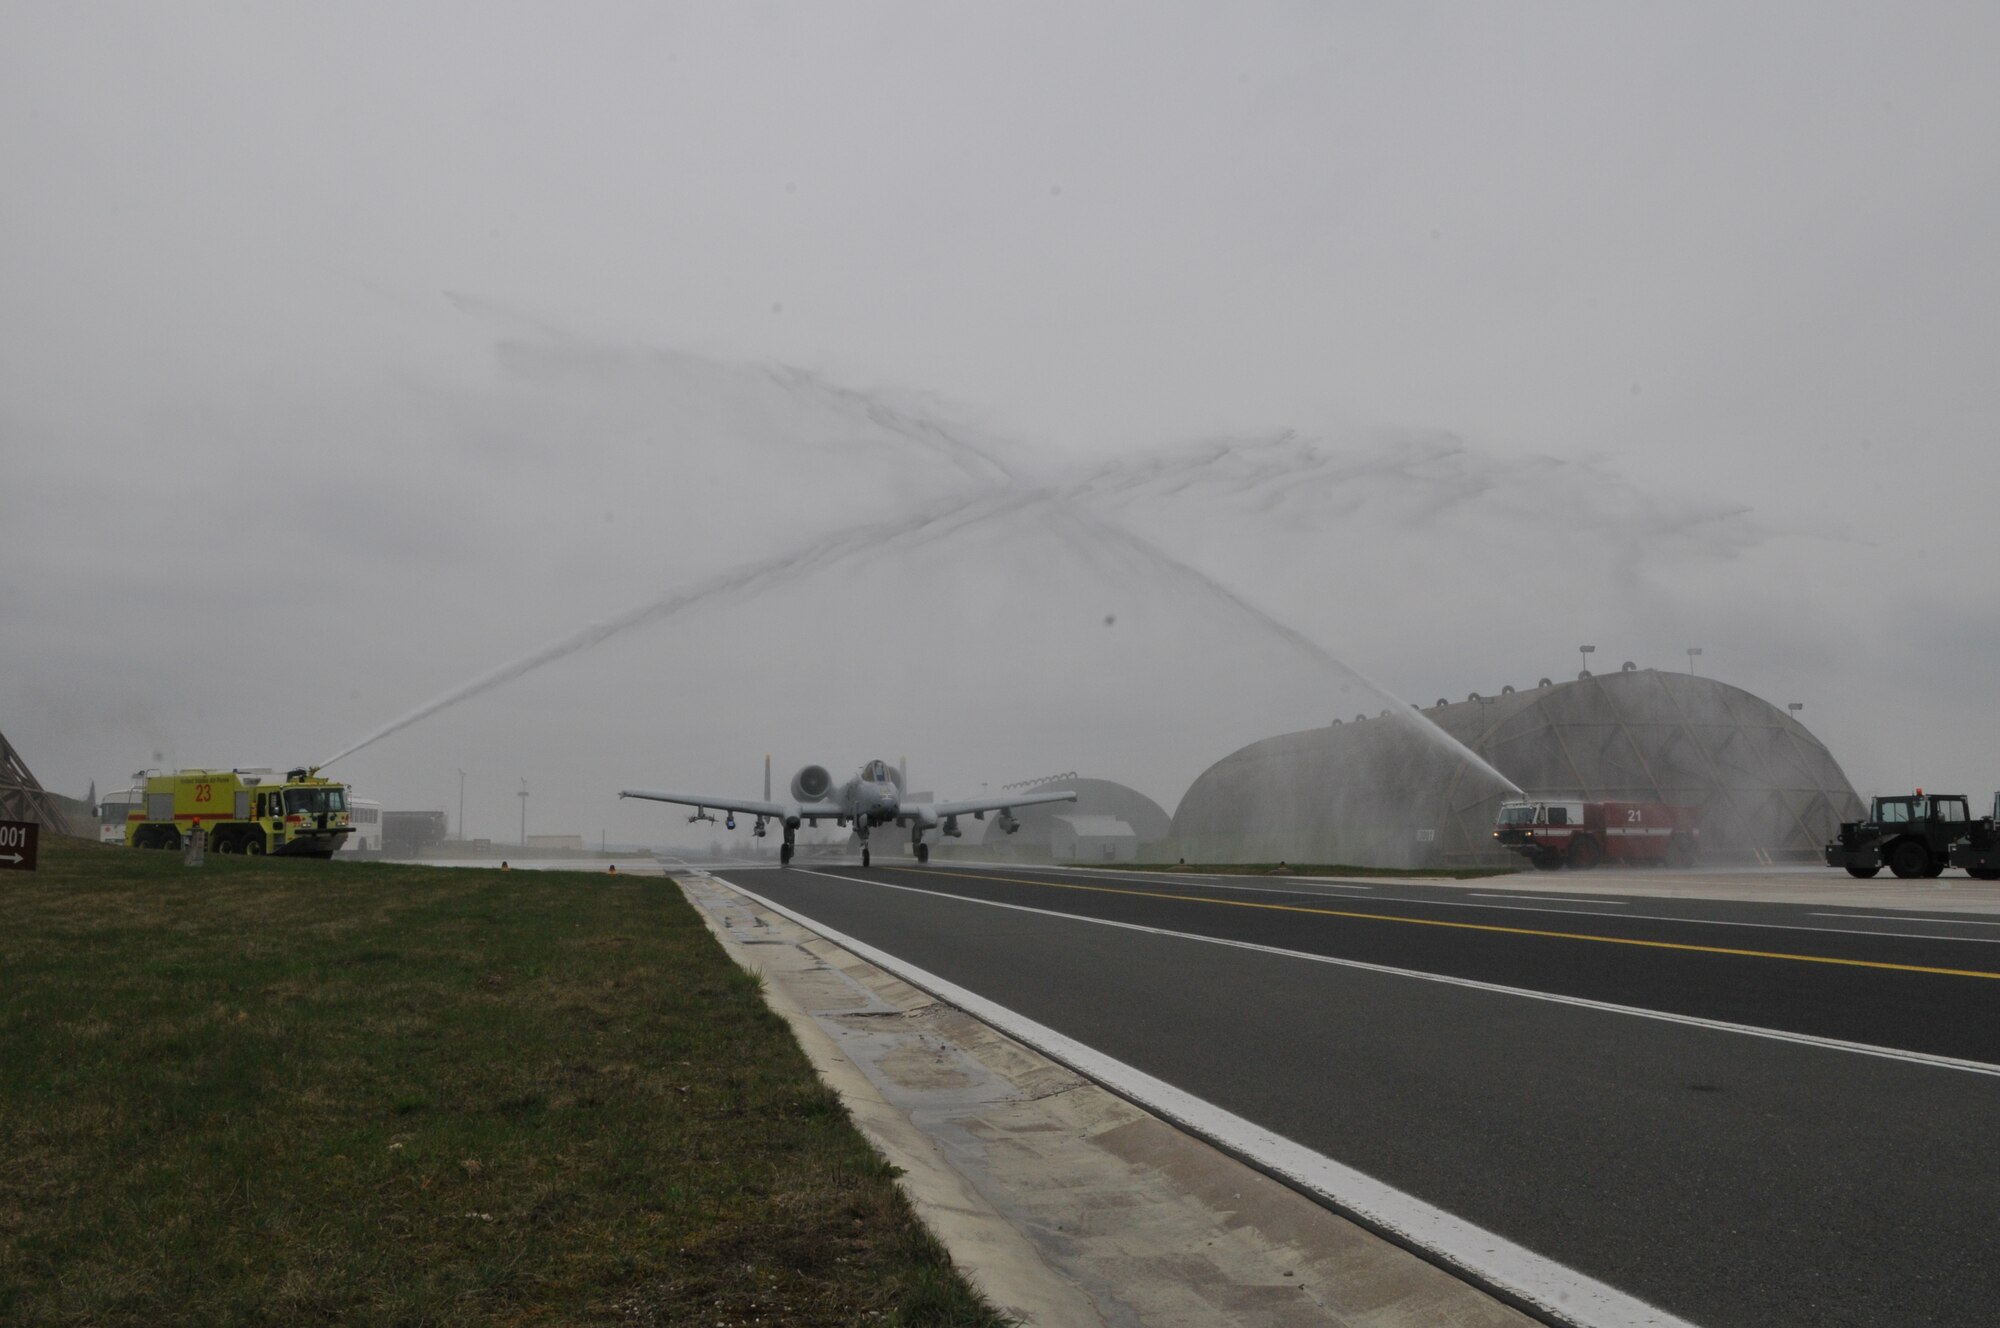 SPANGDAHLEM AIR BASE, Germany – Col. Anderson, 52nd Fighter Wing vice commander, taxis an A-10 Thunderbolt II under an arch of water provided by the 52nd Civil Engineer Squadron fire department after completing his final flight here April 8. Colonel Anderson accumulated more than 1,800 career flying hours. His next assignment is U.S. Senior National Representative, Air Component Command Headquarters, Ramstein Air Base, Germany. (U.S. Air Force photo/Airman 1st Class Nick Wilson)